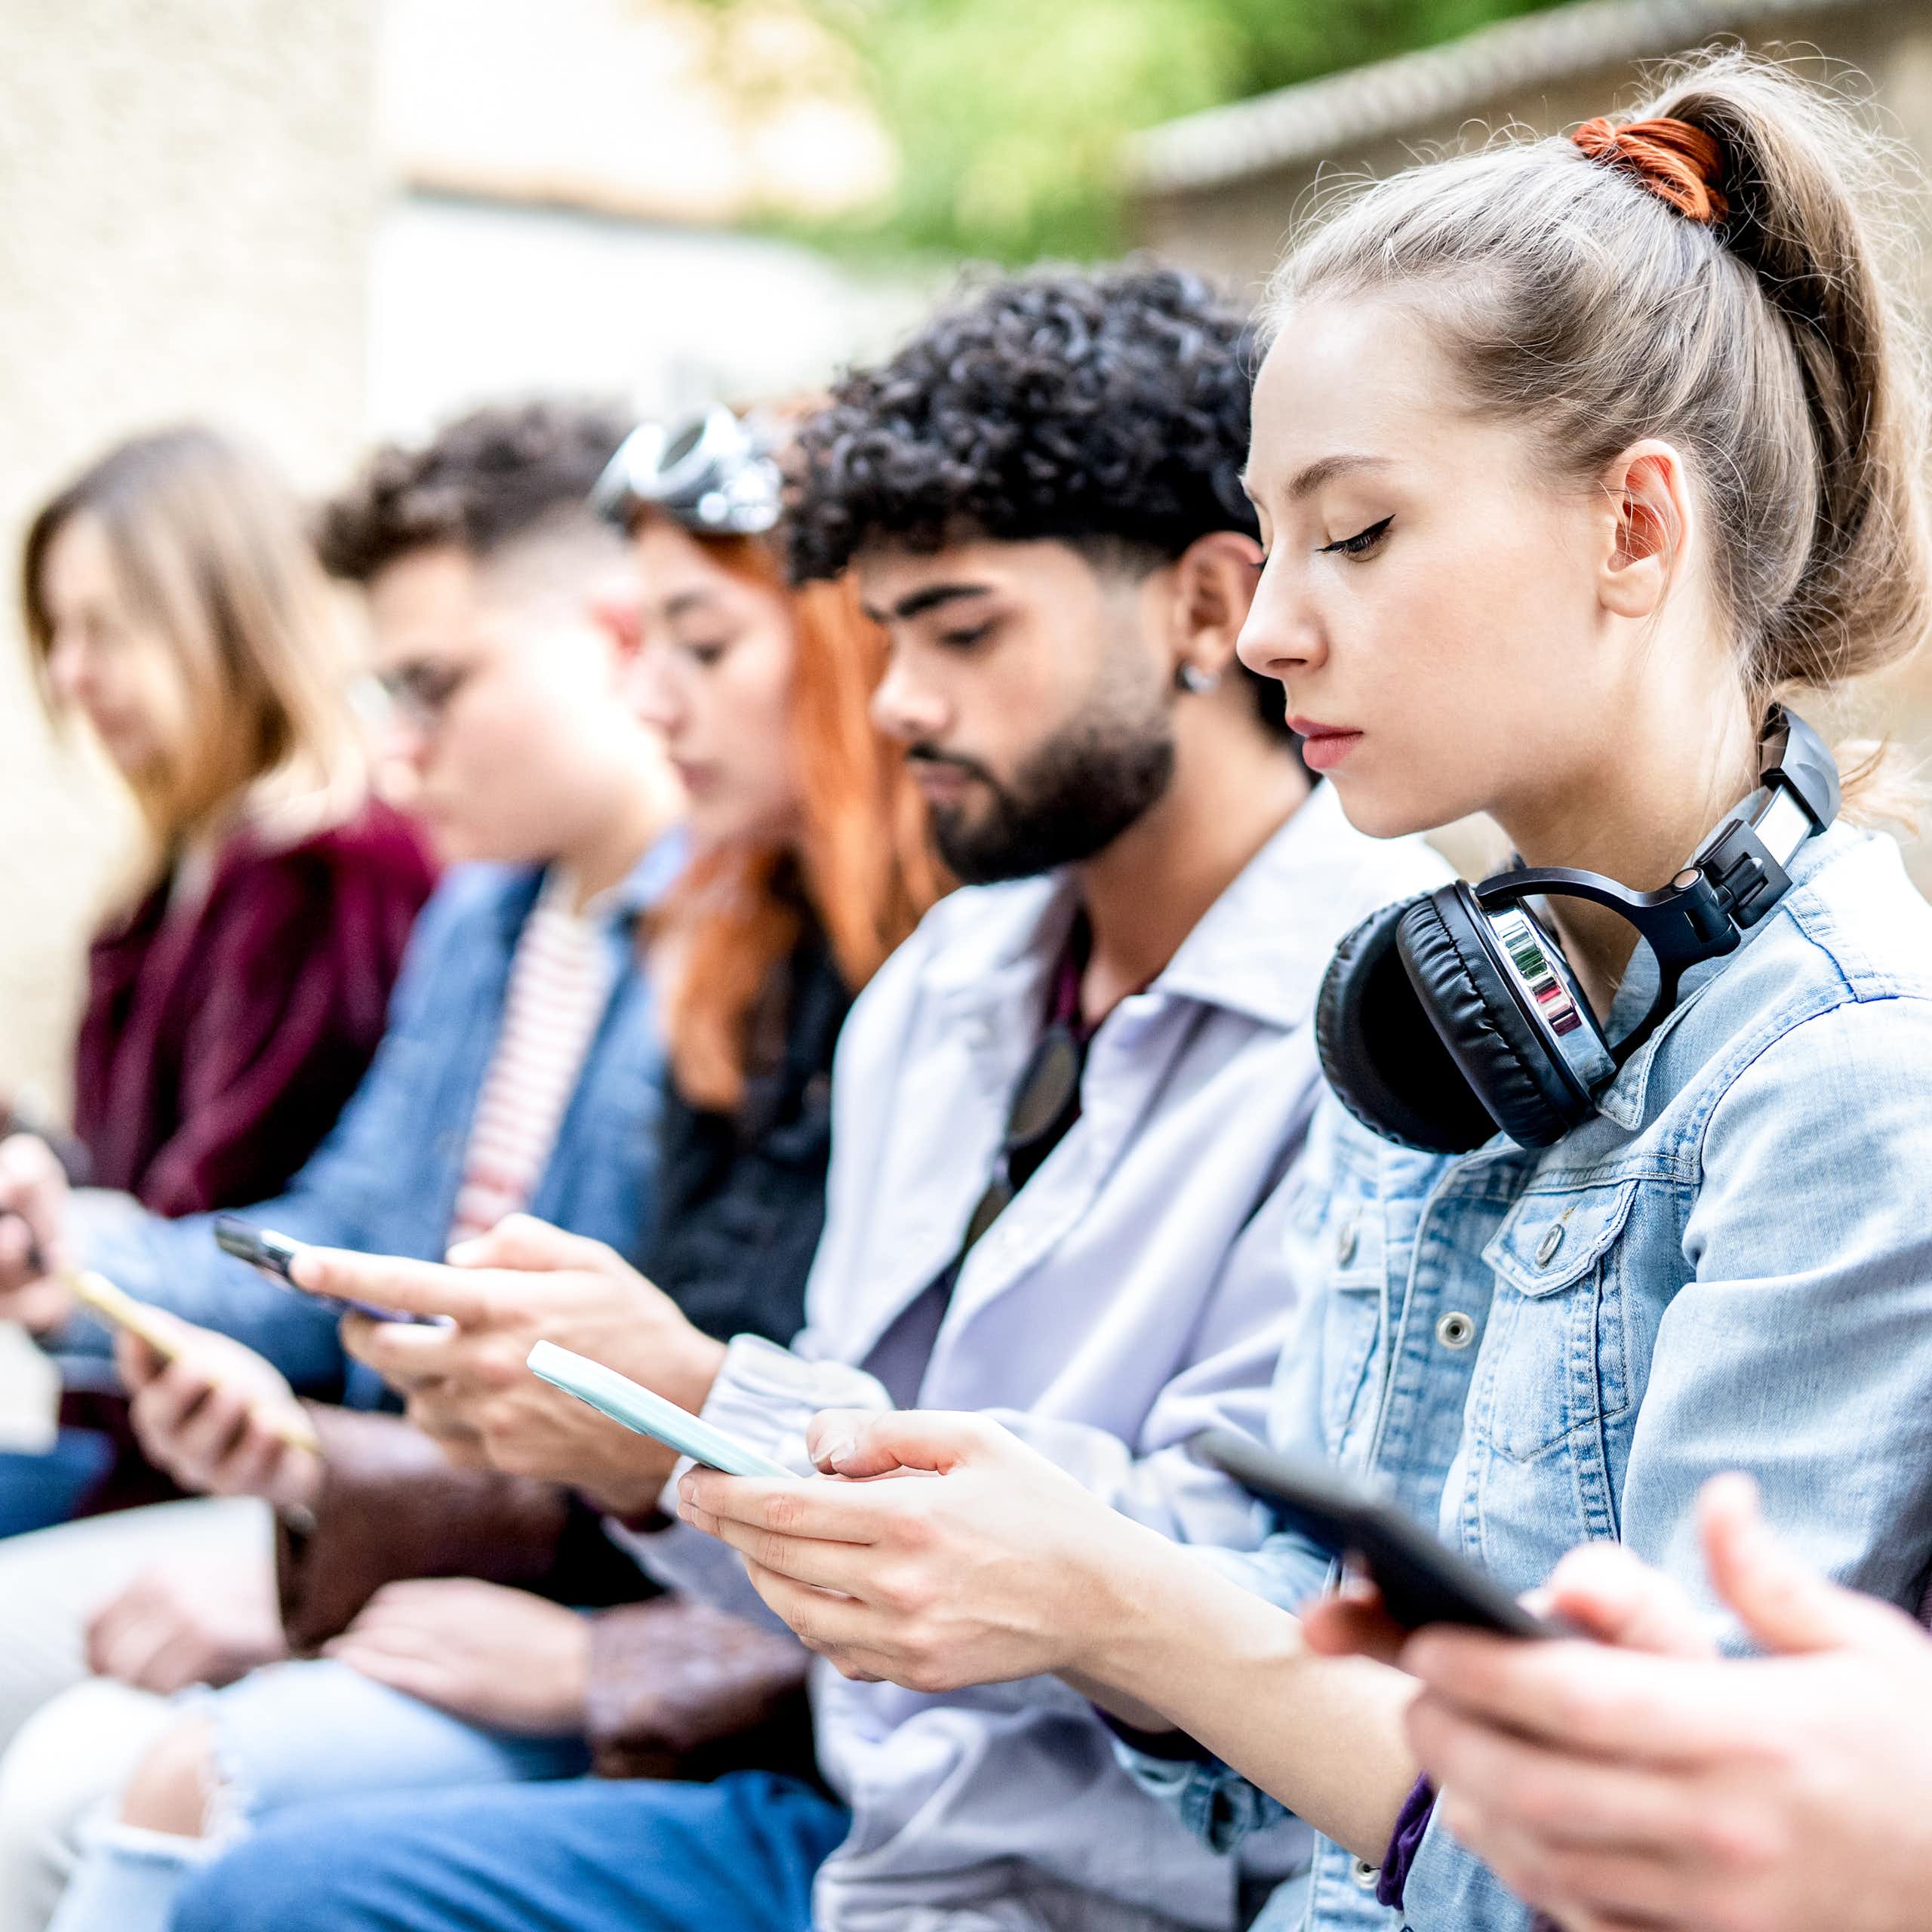 A group of young people sit on a bench as they view and text on their smartphones.